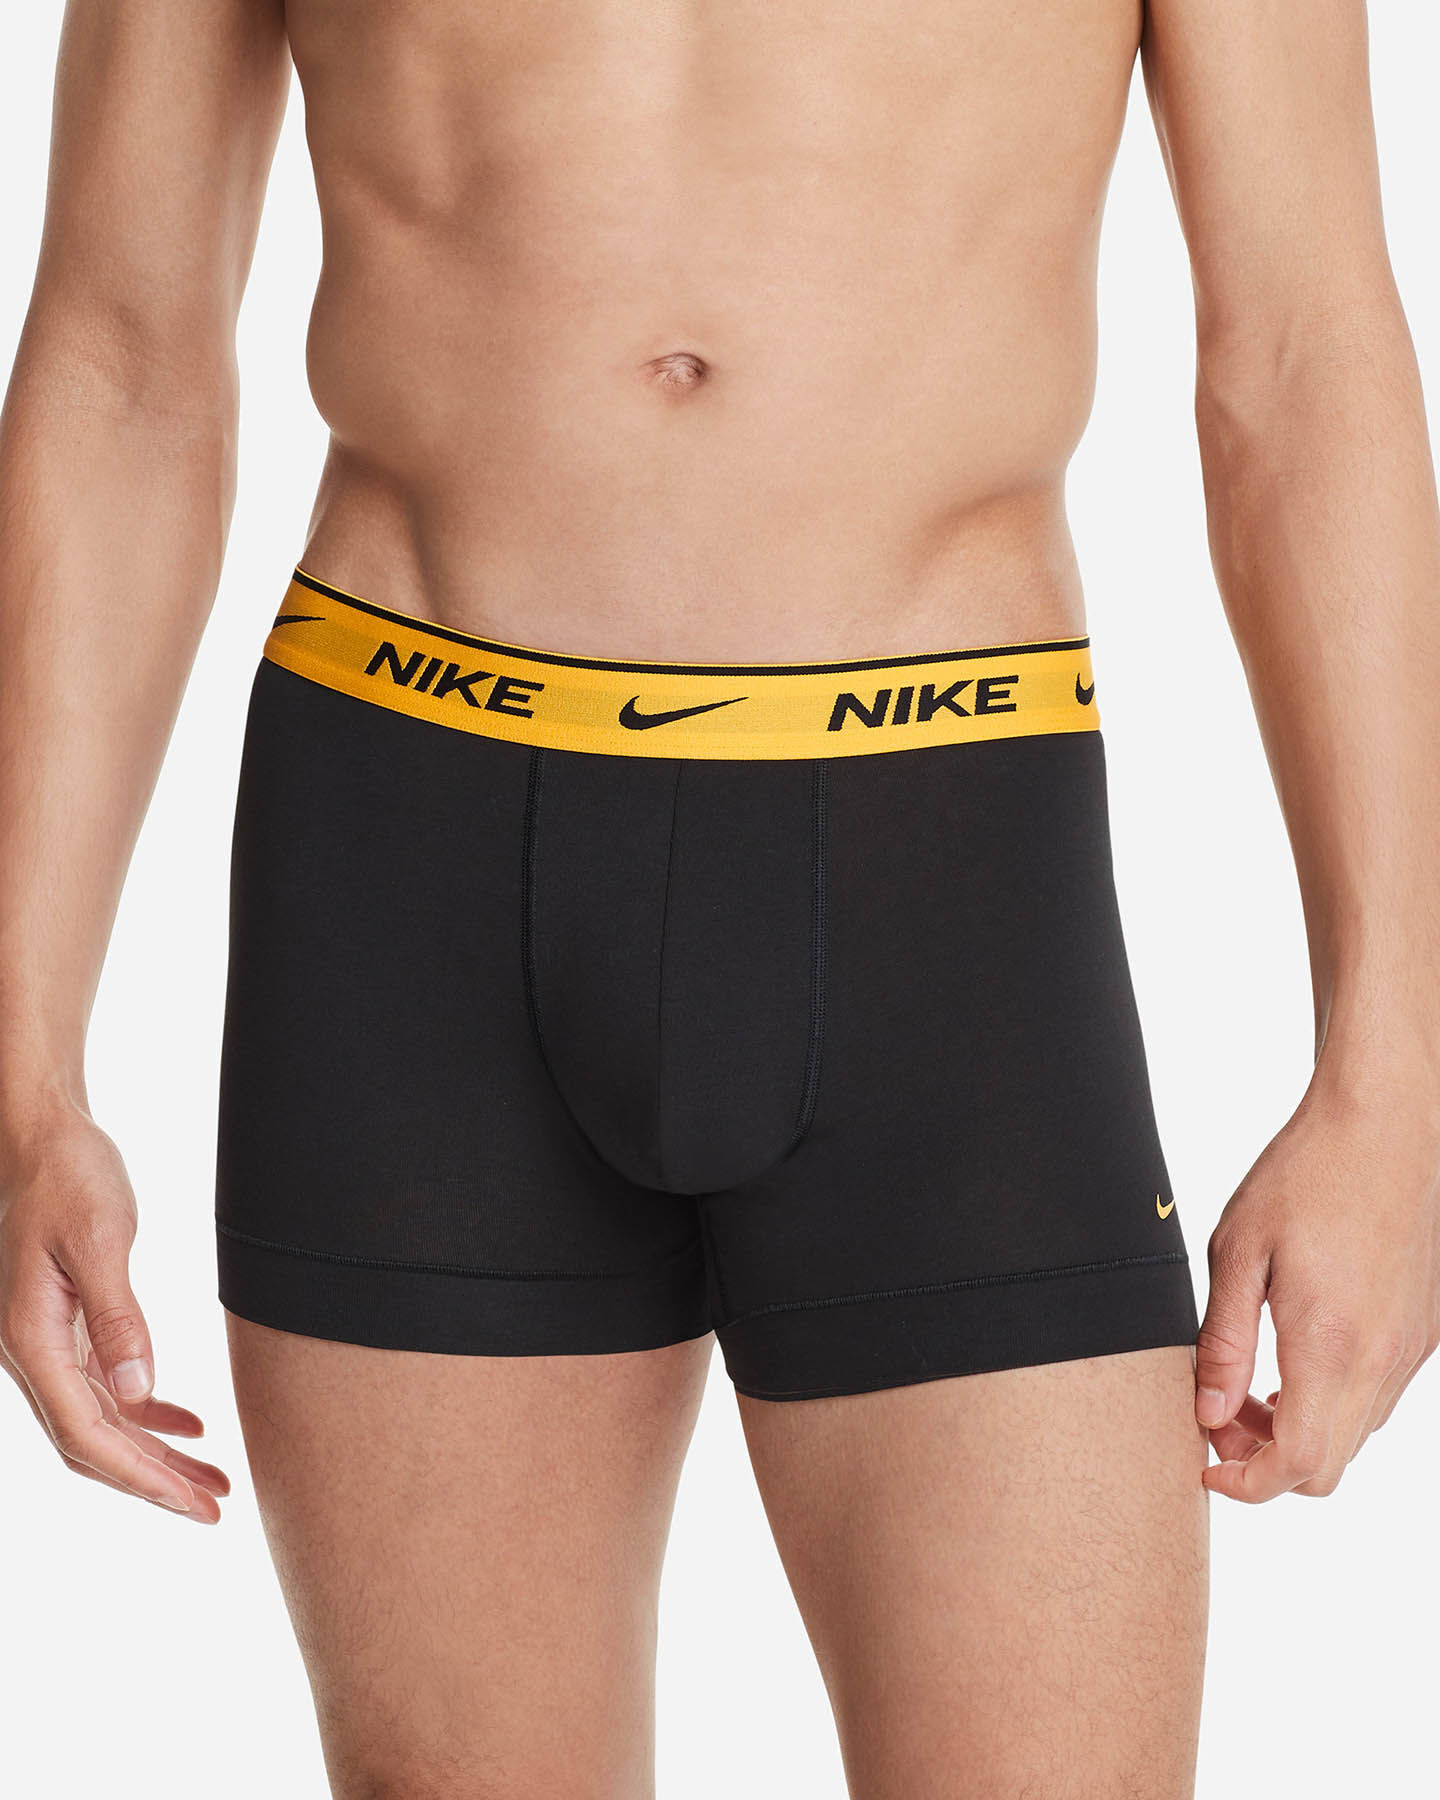  Intimo NIKE 3PACK BOXER EVERYDAY M S4099884|M1R|S scatto 1